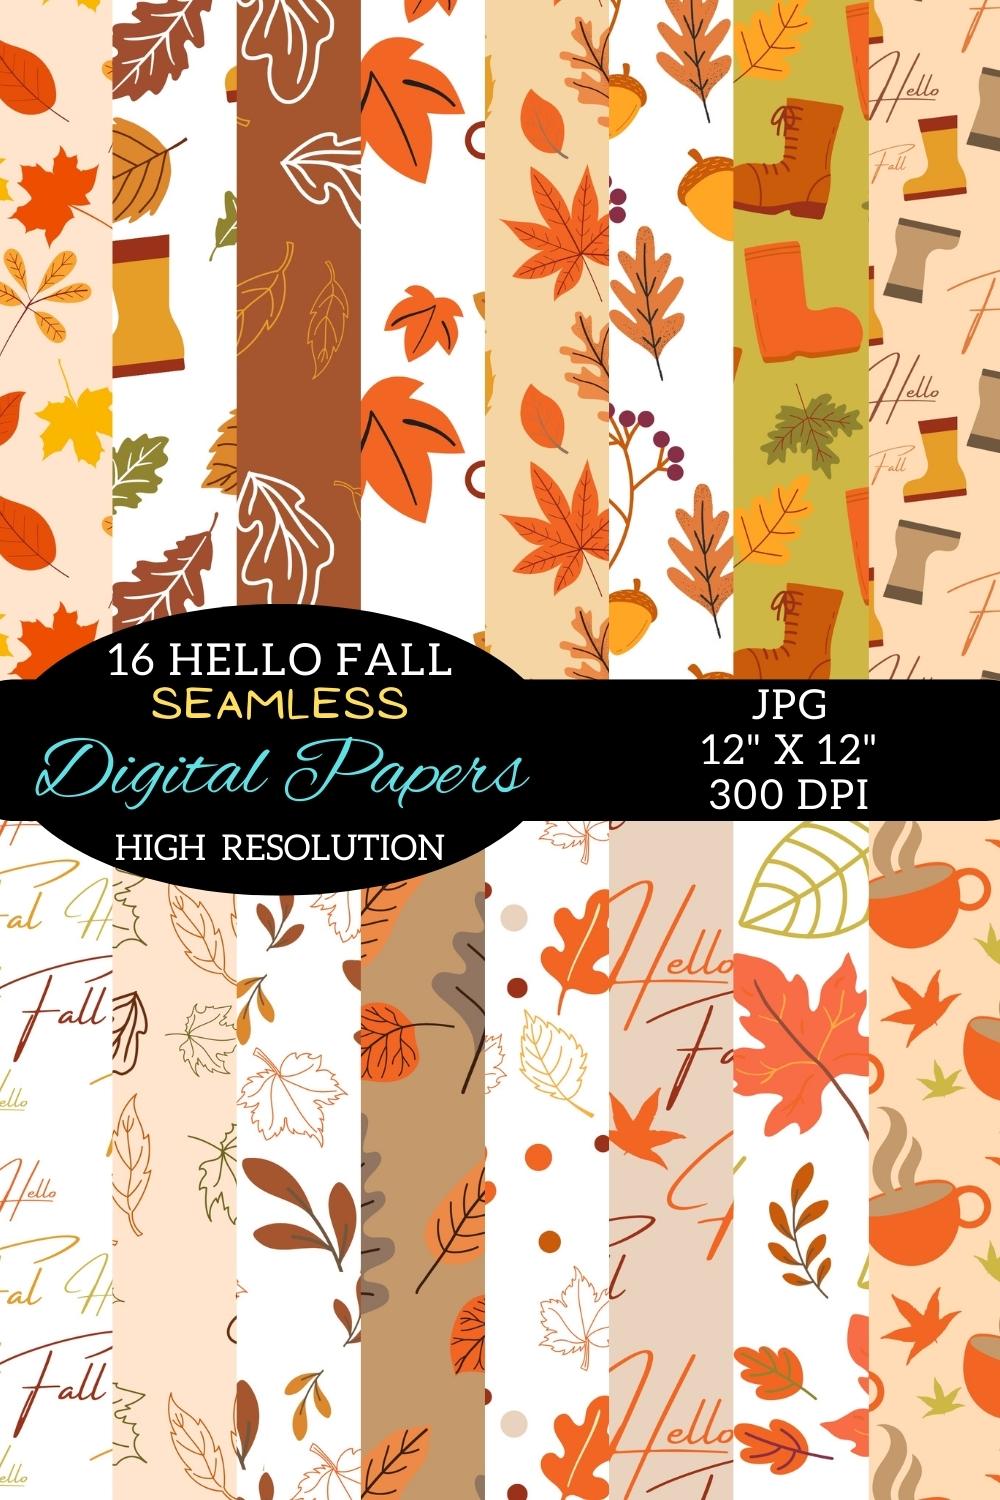 Hello Fall Digital Papers Patterns Design pinterest image.